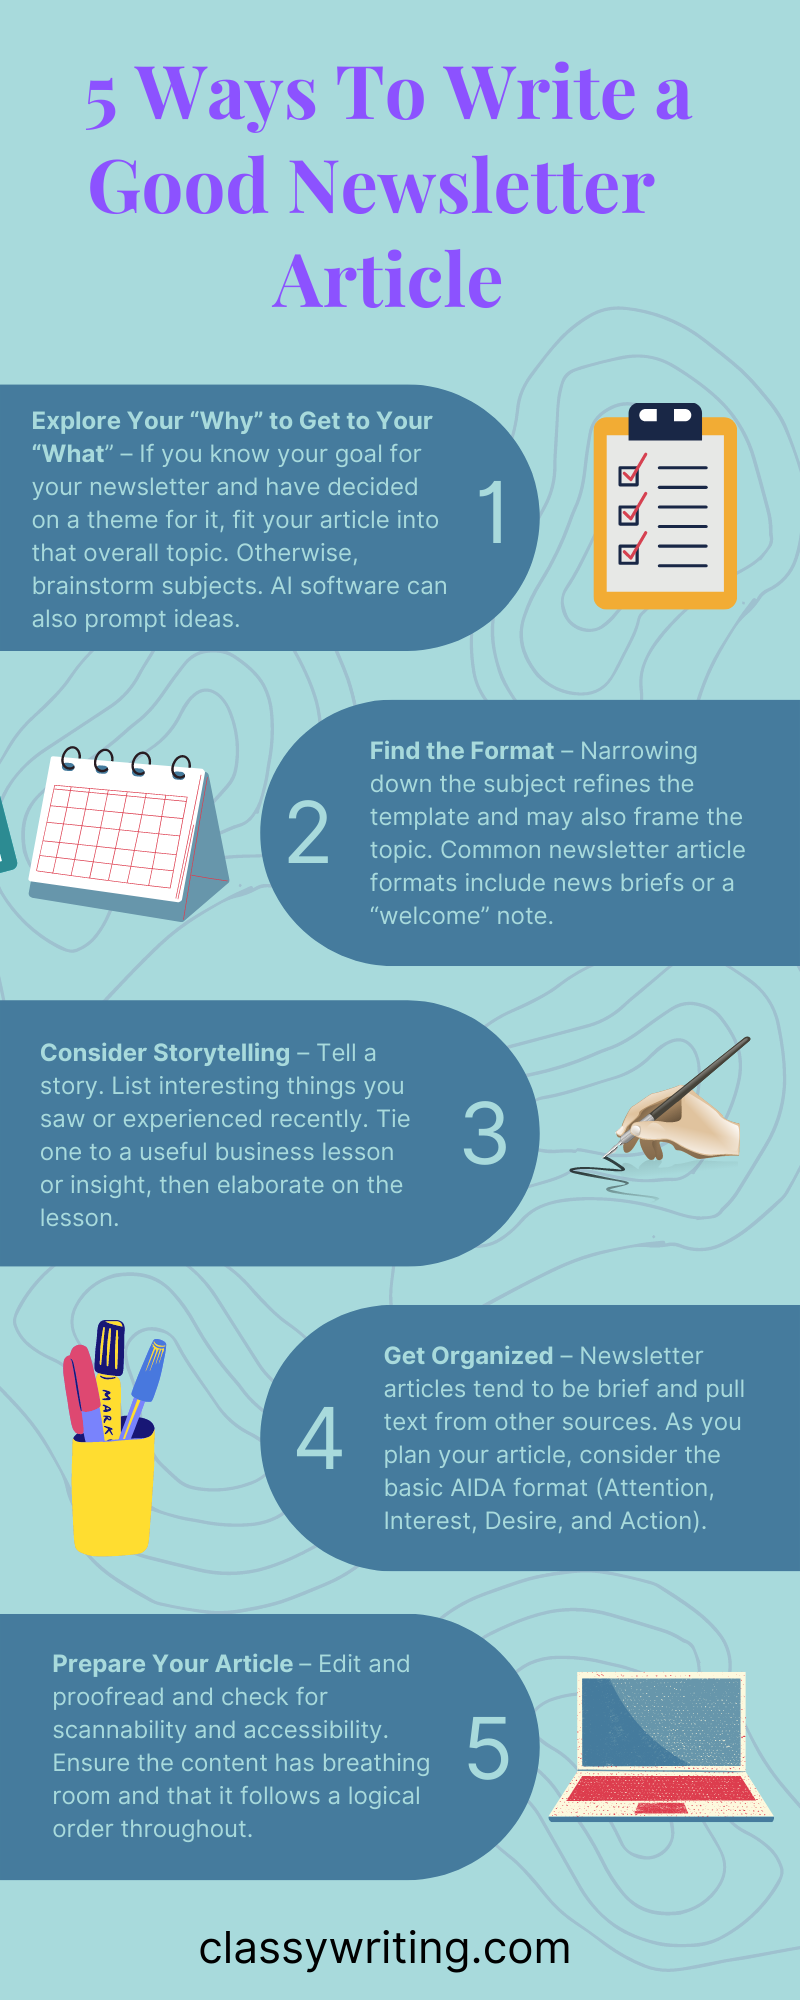 "5 Ways to Write a Good Newsletter Article" infographic that shows how to write an article for a newsletter.